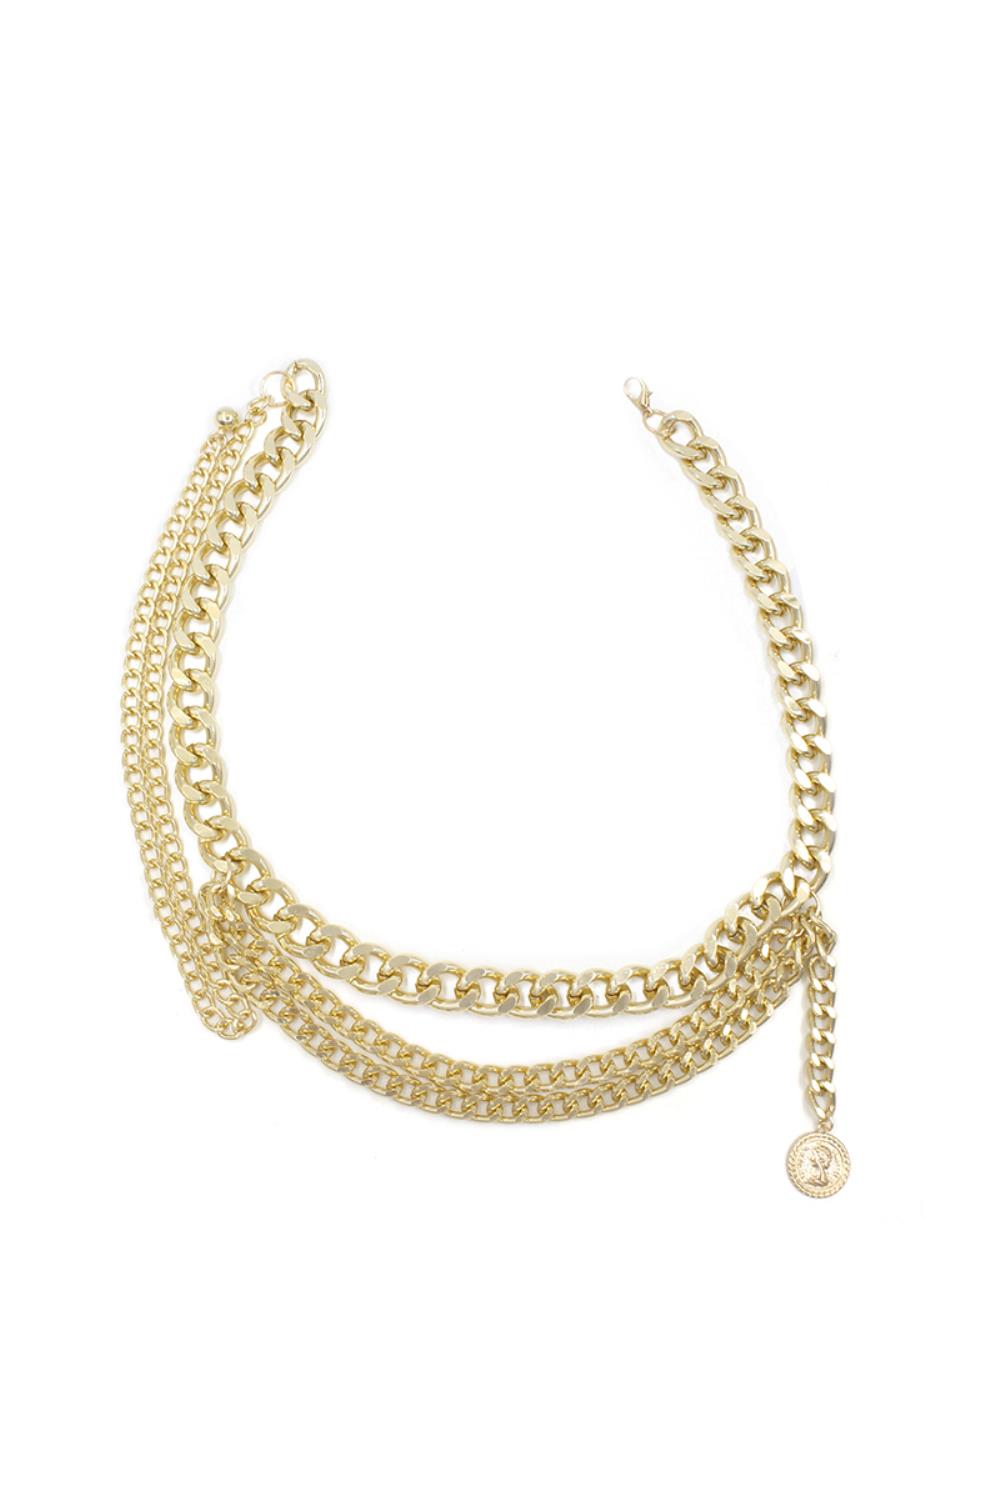 GOLD - Double Drape Chunky Chain Drape Belt - Ships from The US - belt at TFC&H Co.